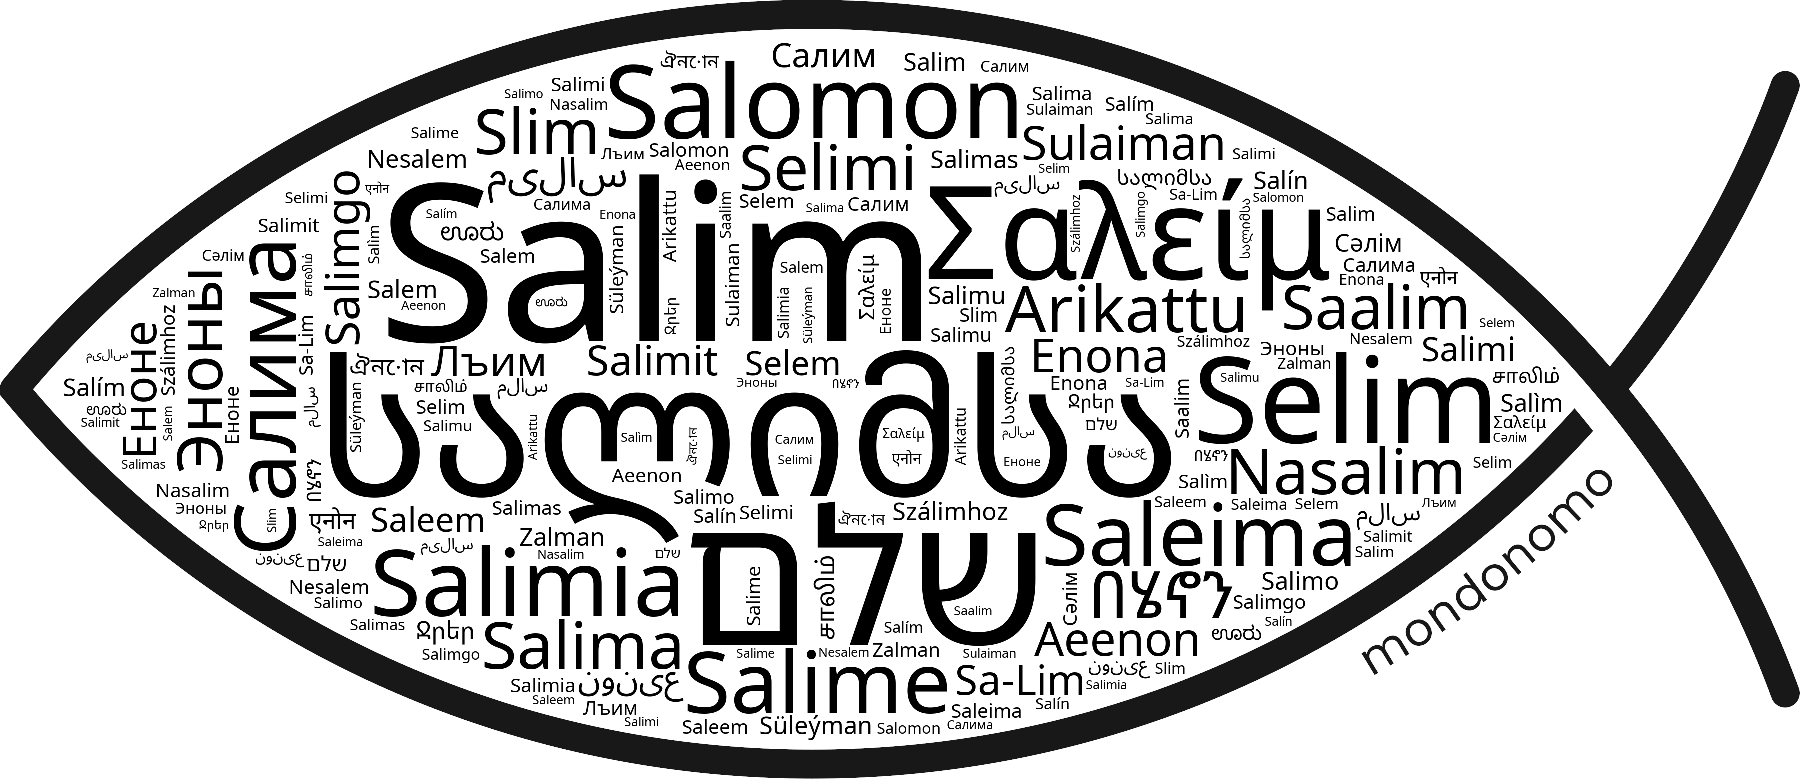 Name Salim in the world's Bibles